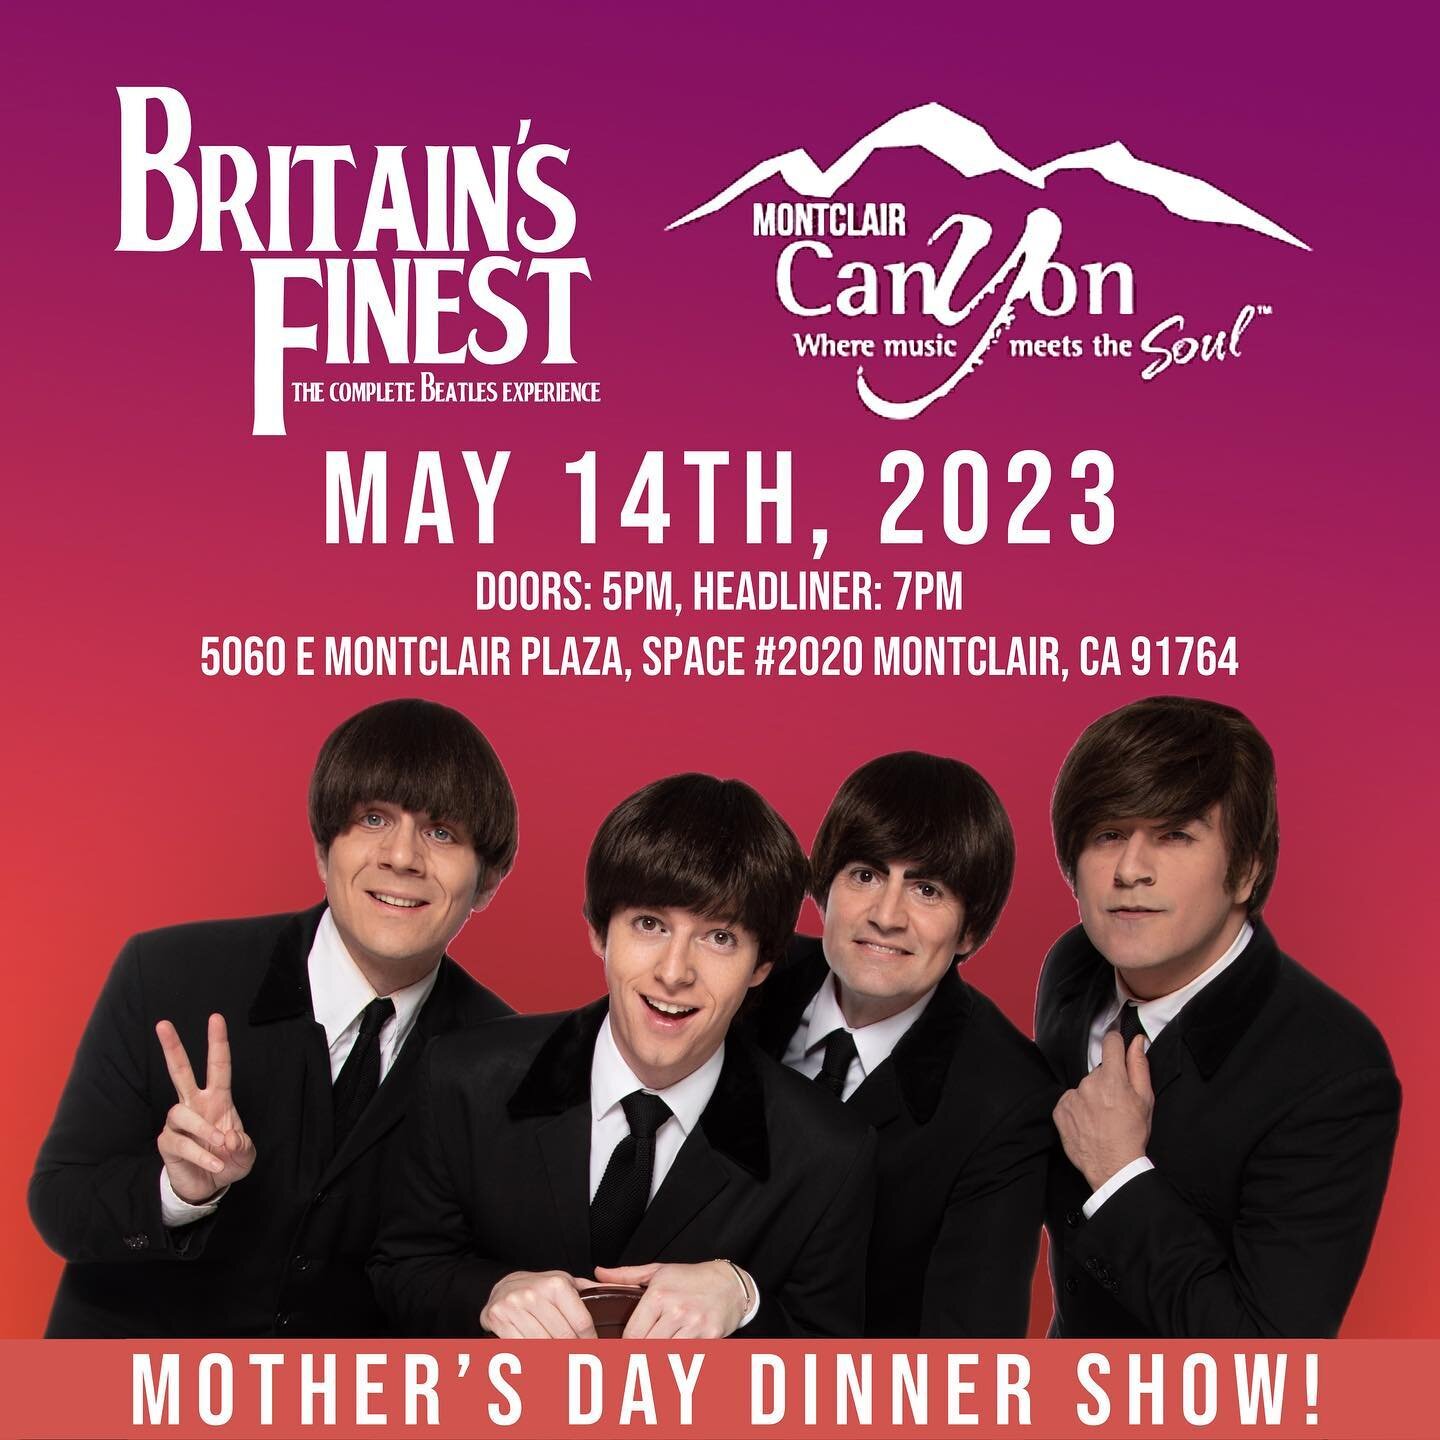 Your Mother Should Know about this show!

Get ready to &ldquo;Relive Beatlemania!&rdquo; with So Cal&rsquo;s very own foremost Beatles tribute band Britain&rsquo;s Finest. 

The group transcends far above other Beatles tributes due to their precise a